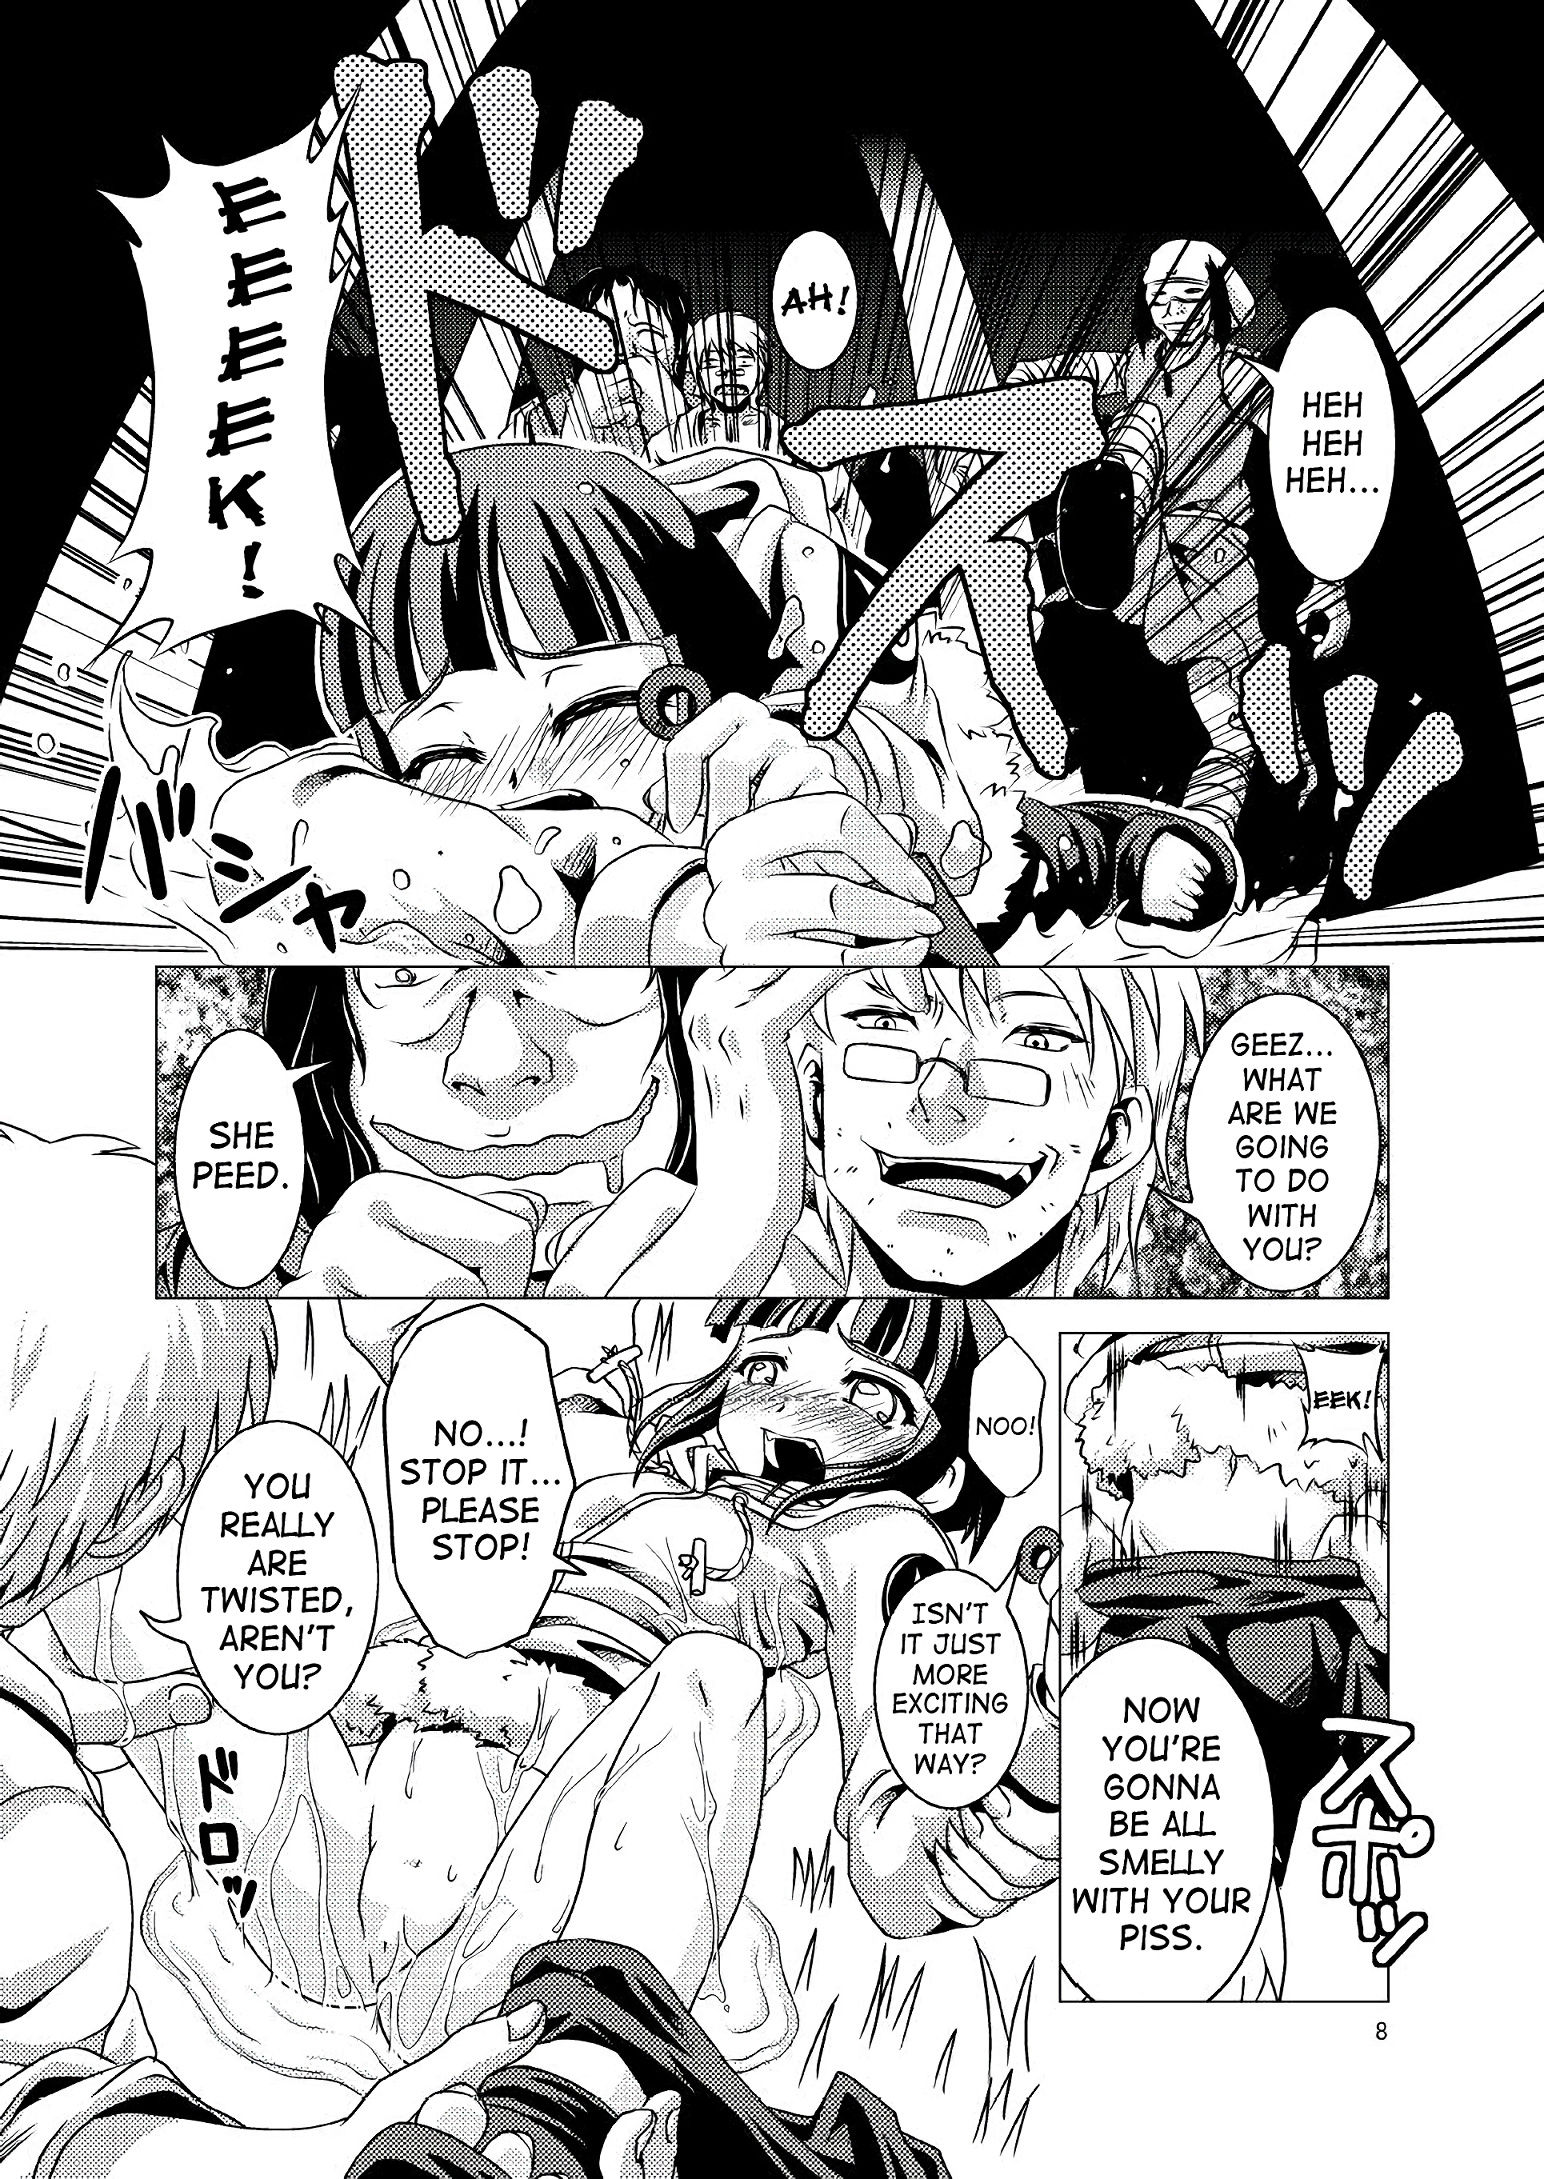 Midsummer red dragonfly hentai manga picture 7